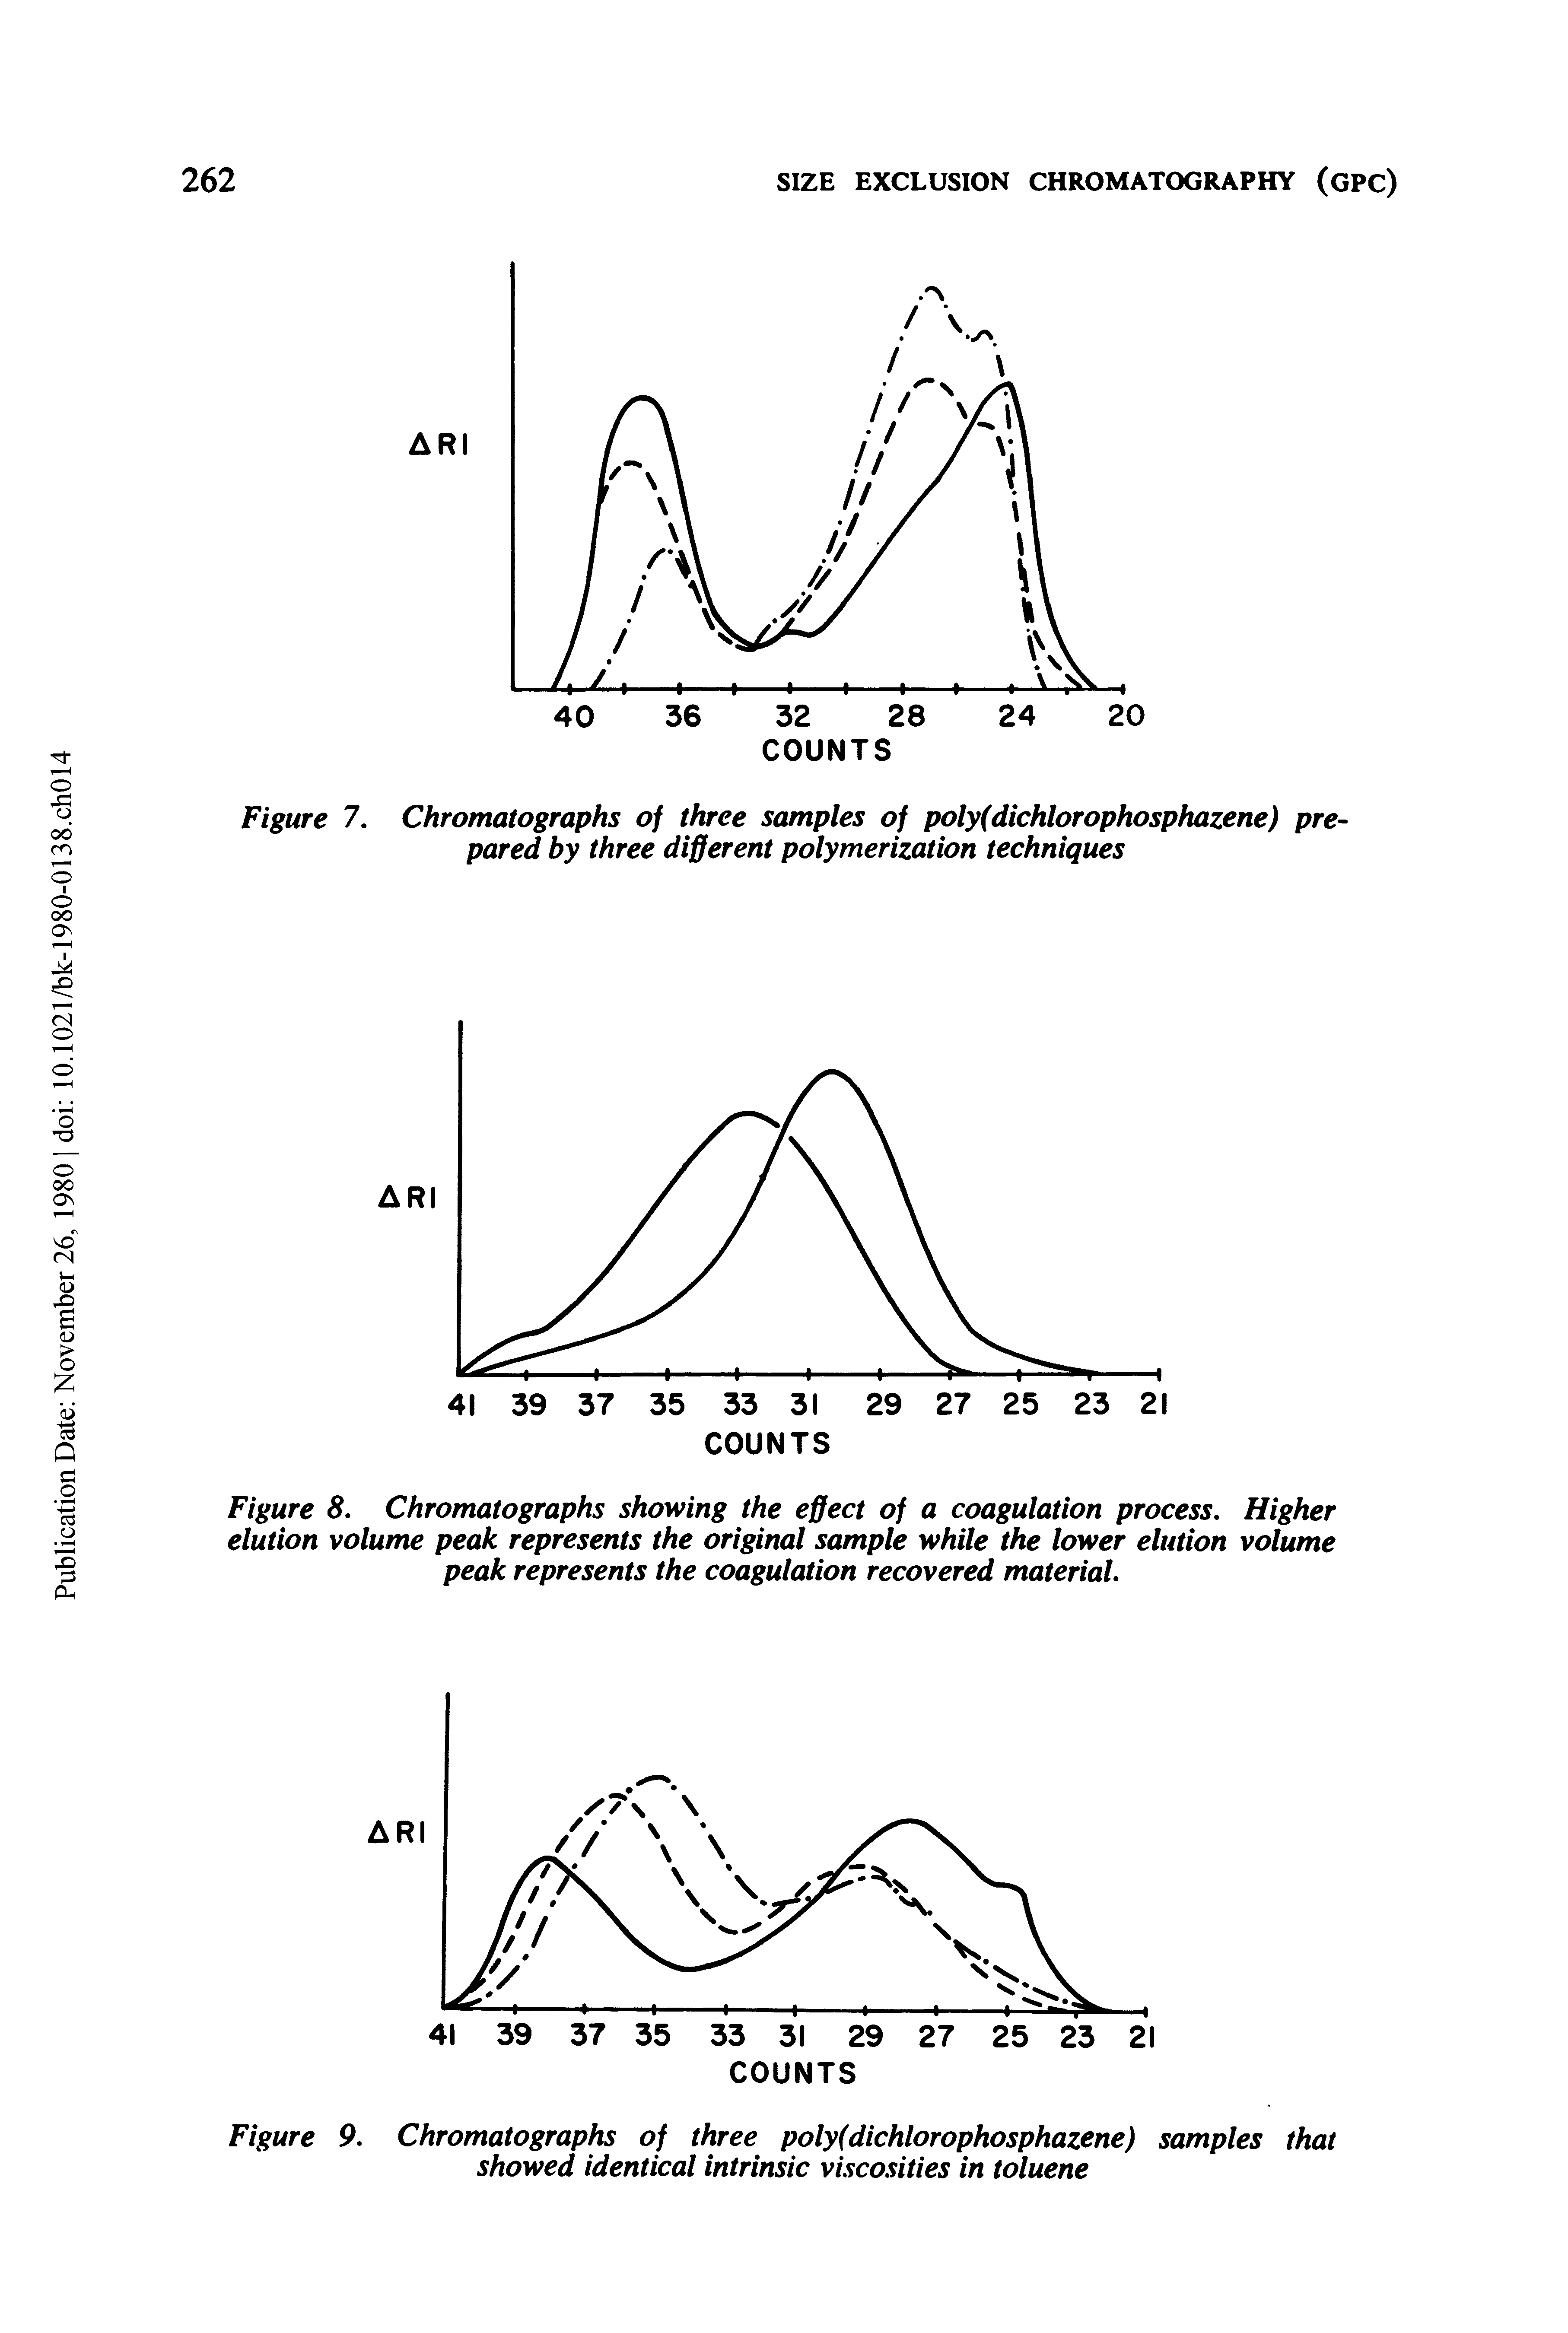 Figure 7. Chromatographs of three samples of poly(dichlorophosphazene) prepared by three different polymerization techniques...